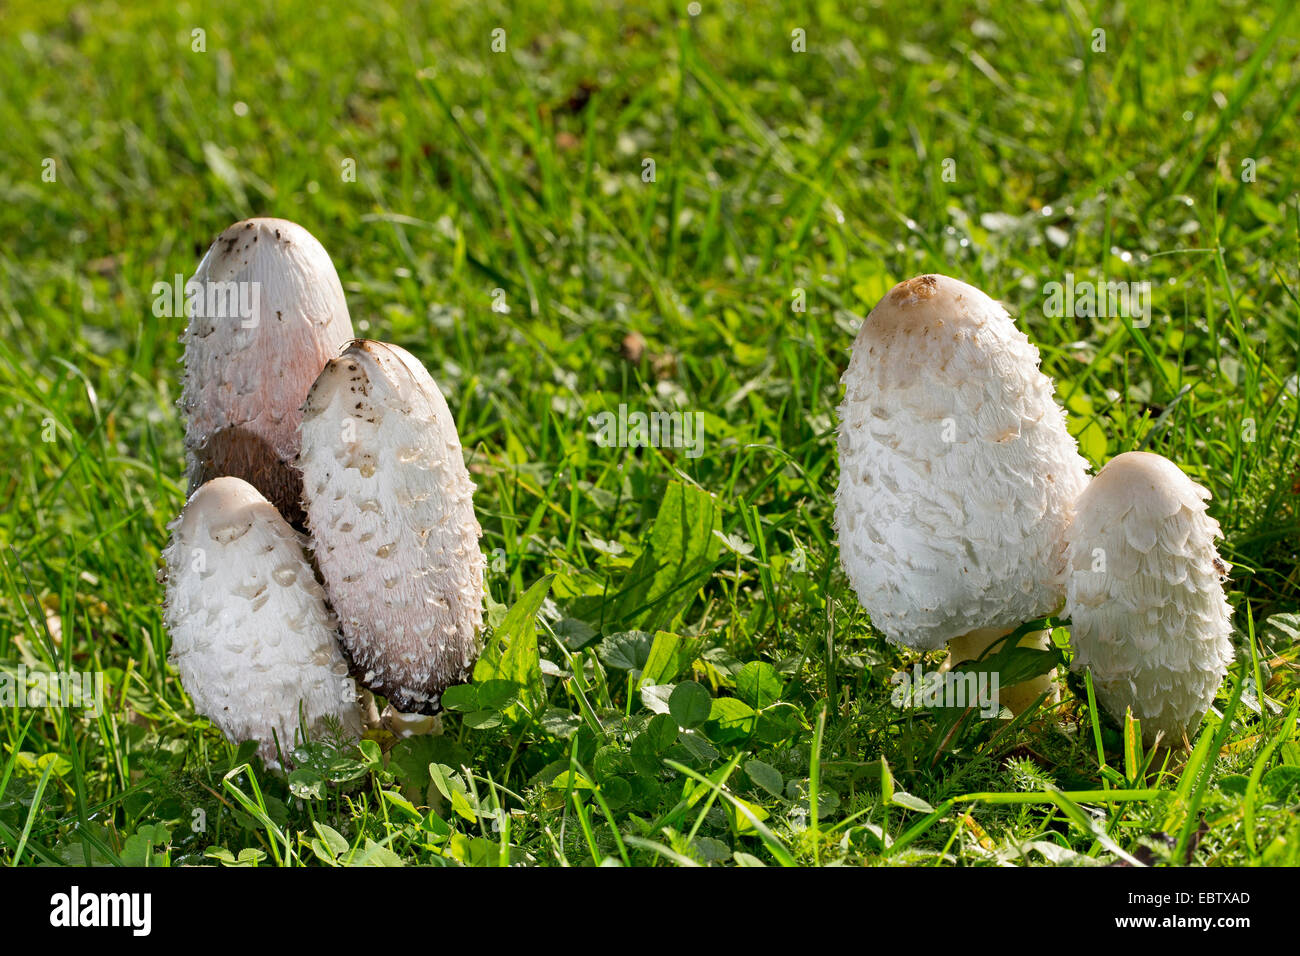 Shaggy ink cap, Lawyer's wig, Shaggy mane (Coprinus comatus), fruiting bodies in a meadow, Germany Stock Photo